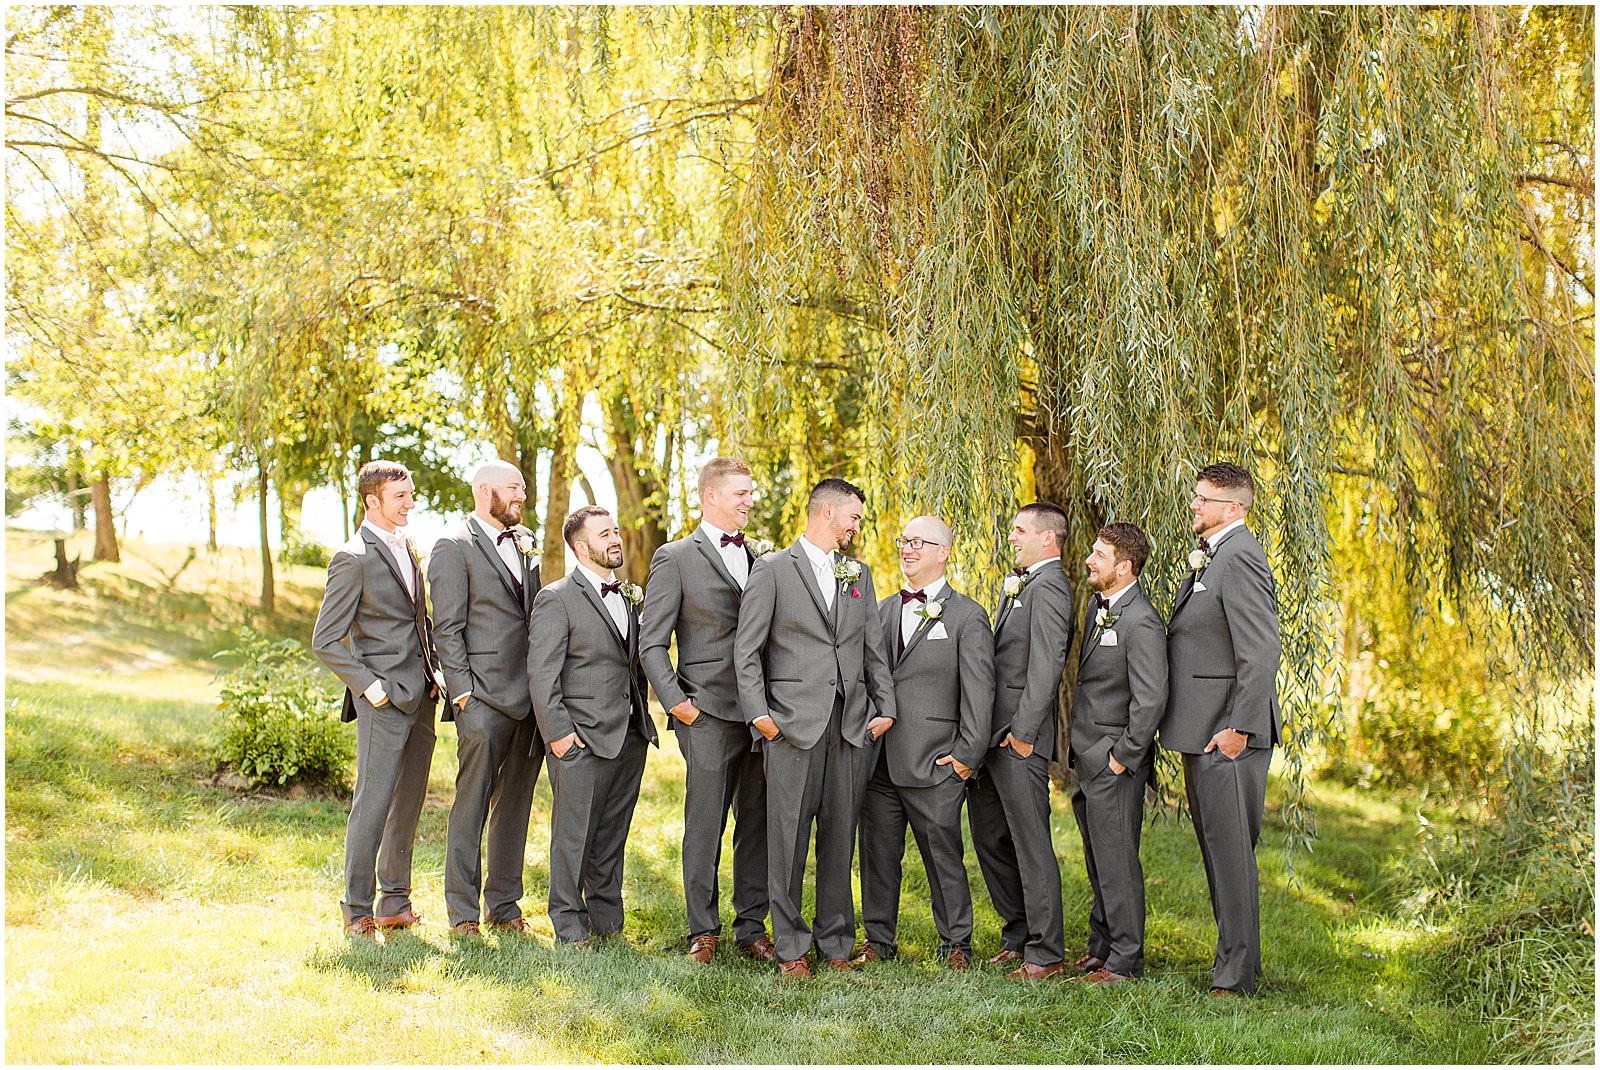 A Stunning Fall Wedding in Indianapolis, IN |. Sally and Andrew | Bret and Brandie Photography 0075.jpg